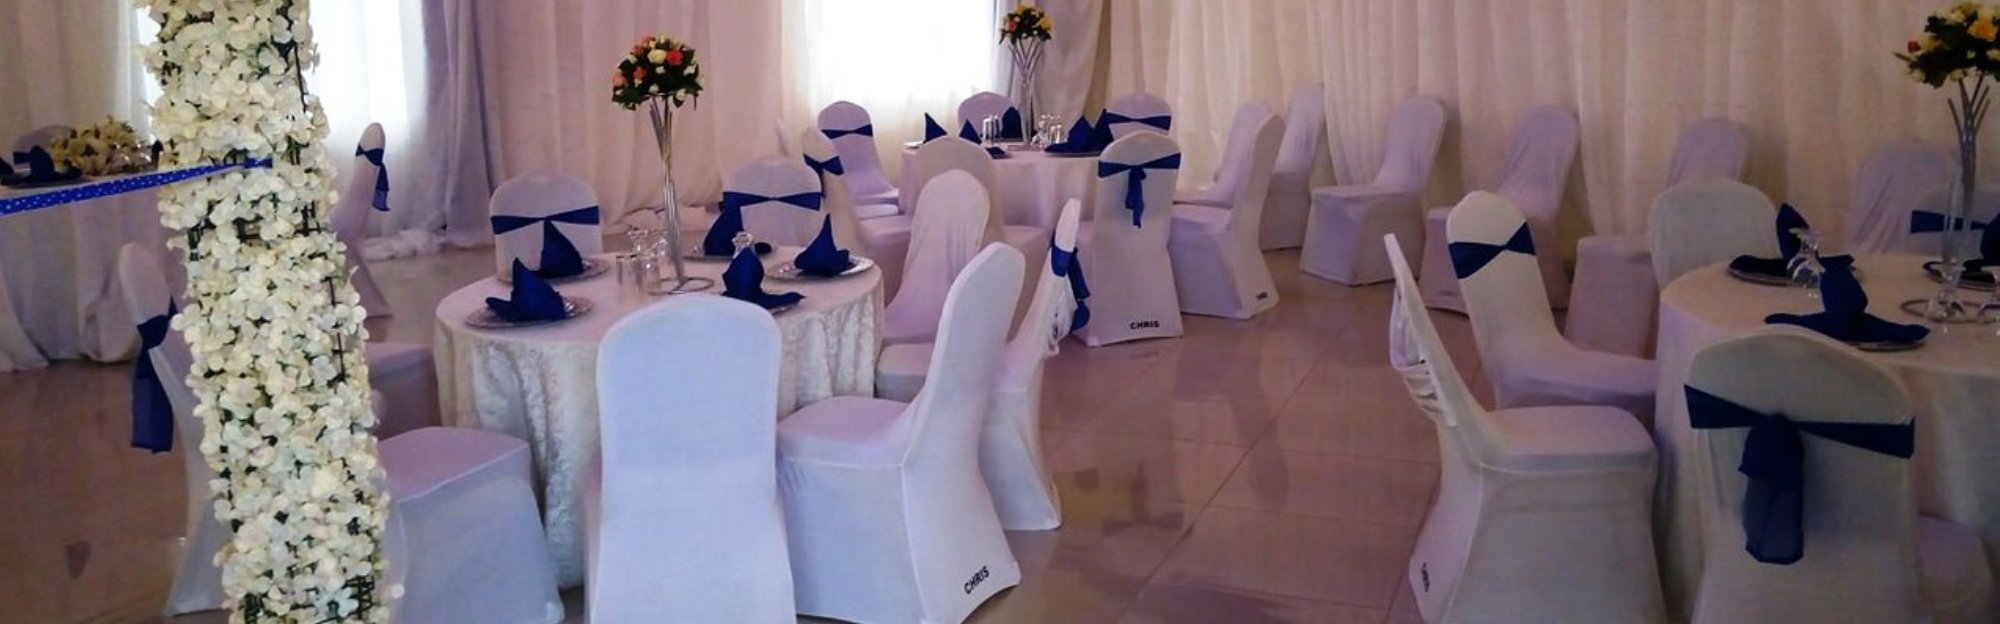 Fort Breeze Hotel Conference & Weddings